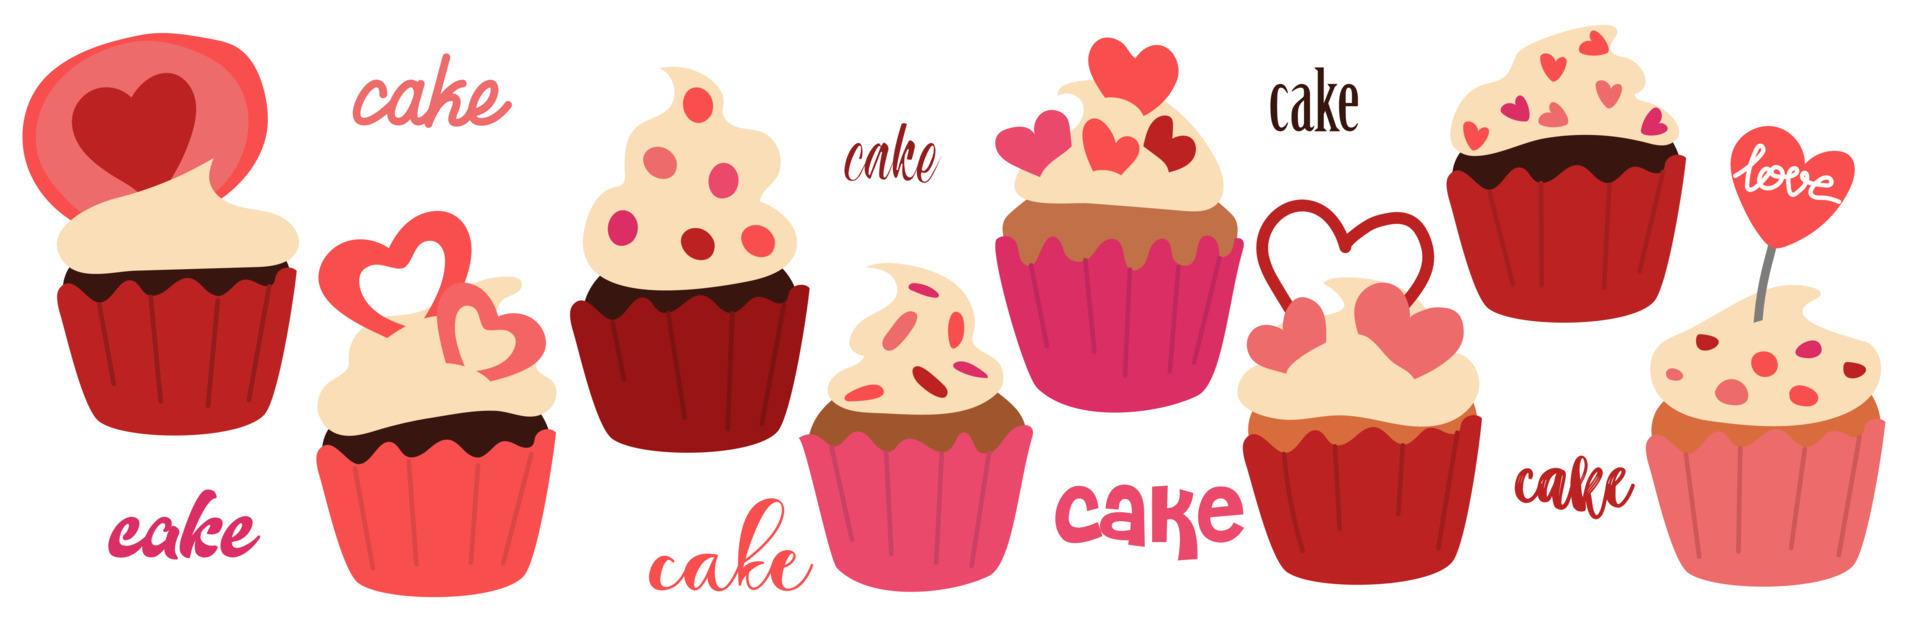 https://static.vecteezy.com/system/resources/previews/017/006/791/original/set-of-sweet-cupcakes-collection-of-creamy-muffins-with-decoration-delicous-food-confectionery-illustration-of-sweet-baking-on-white-background-vector.jpg